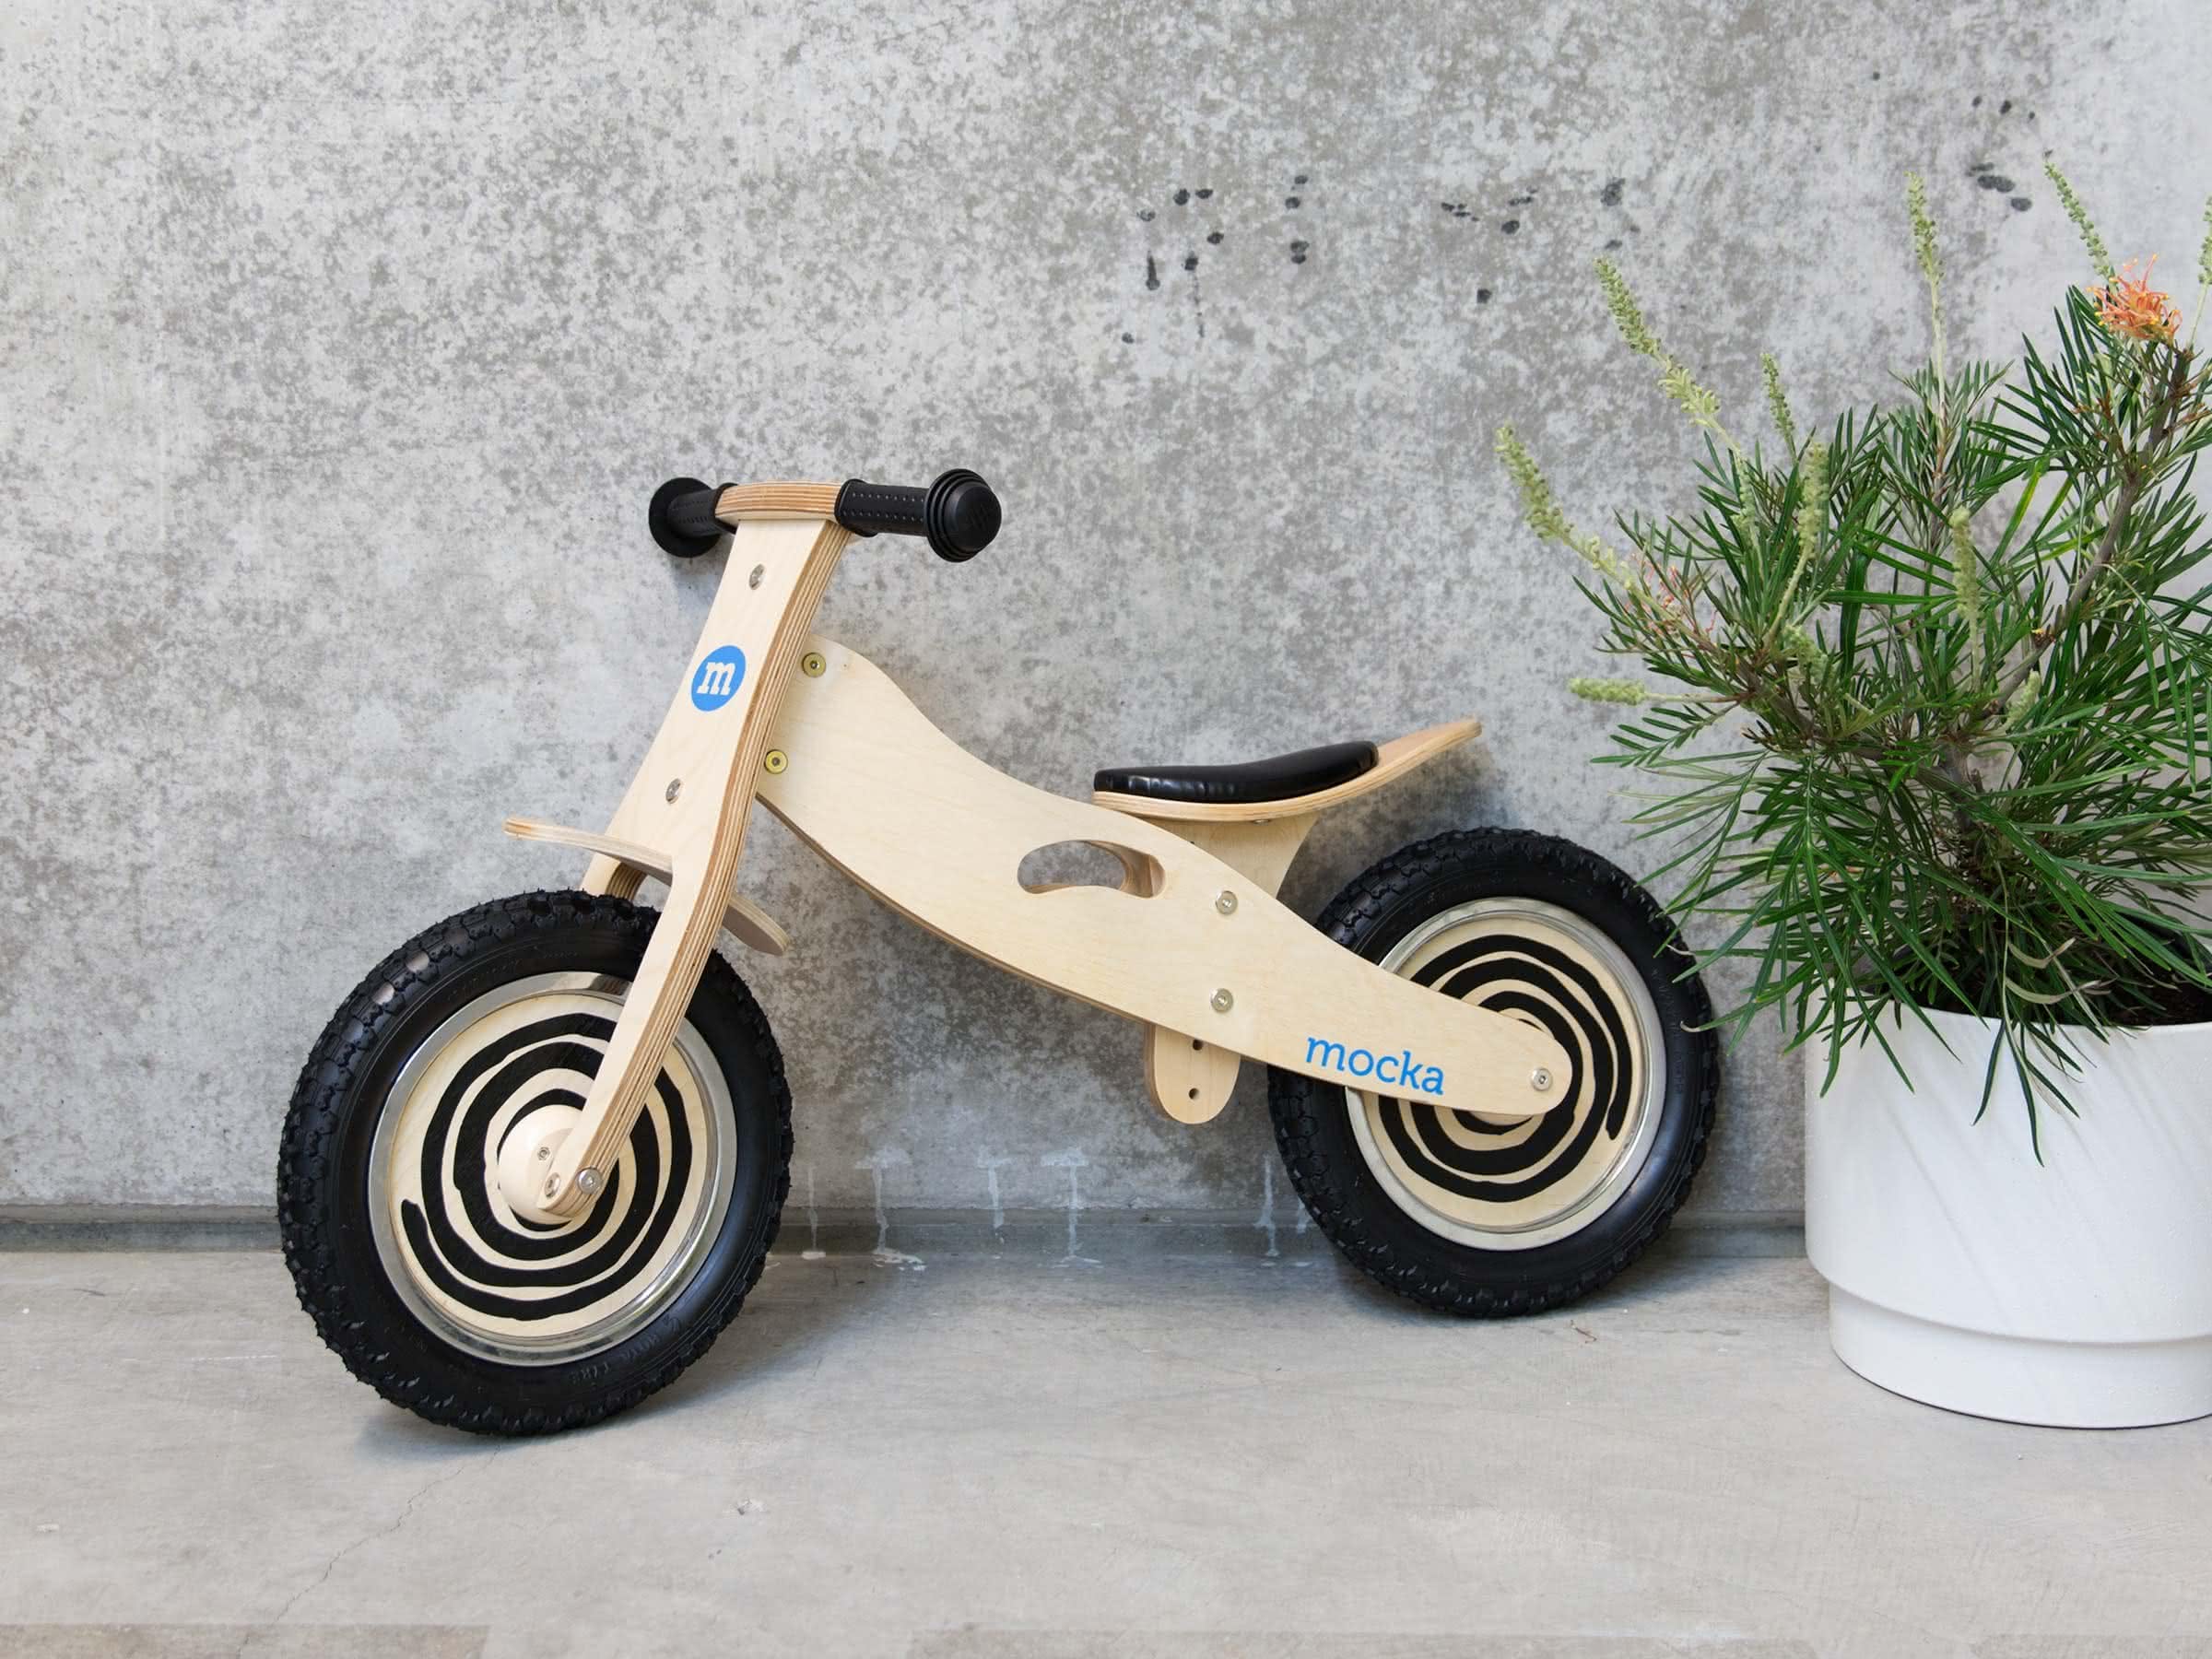 Balance bikes are a much safer option for